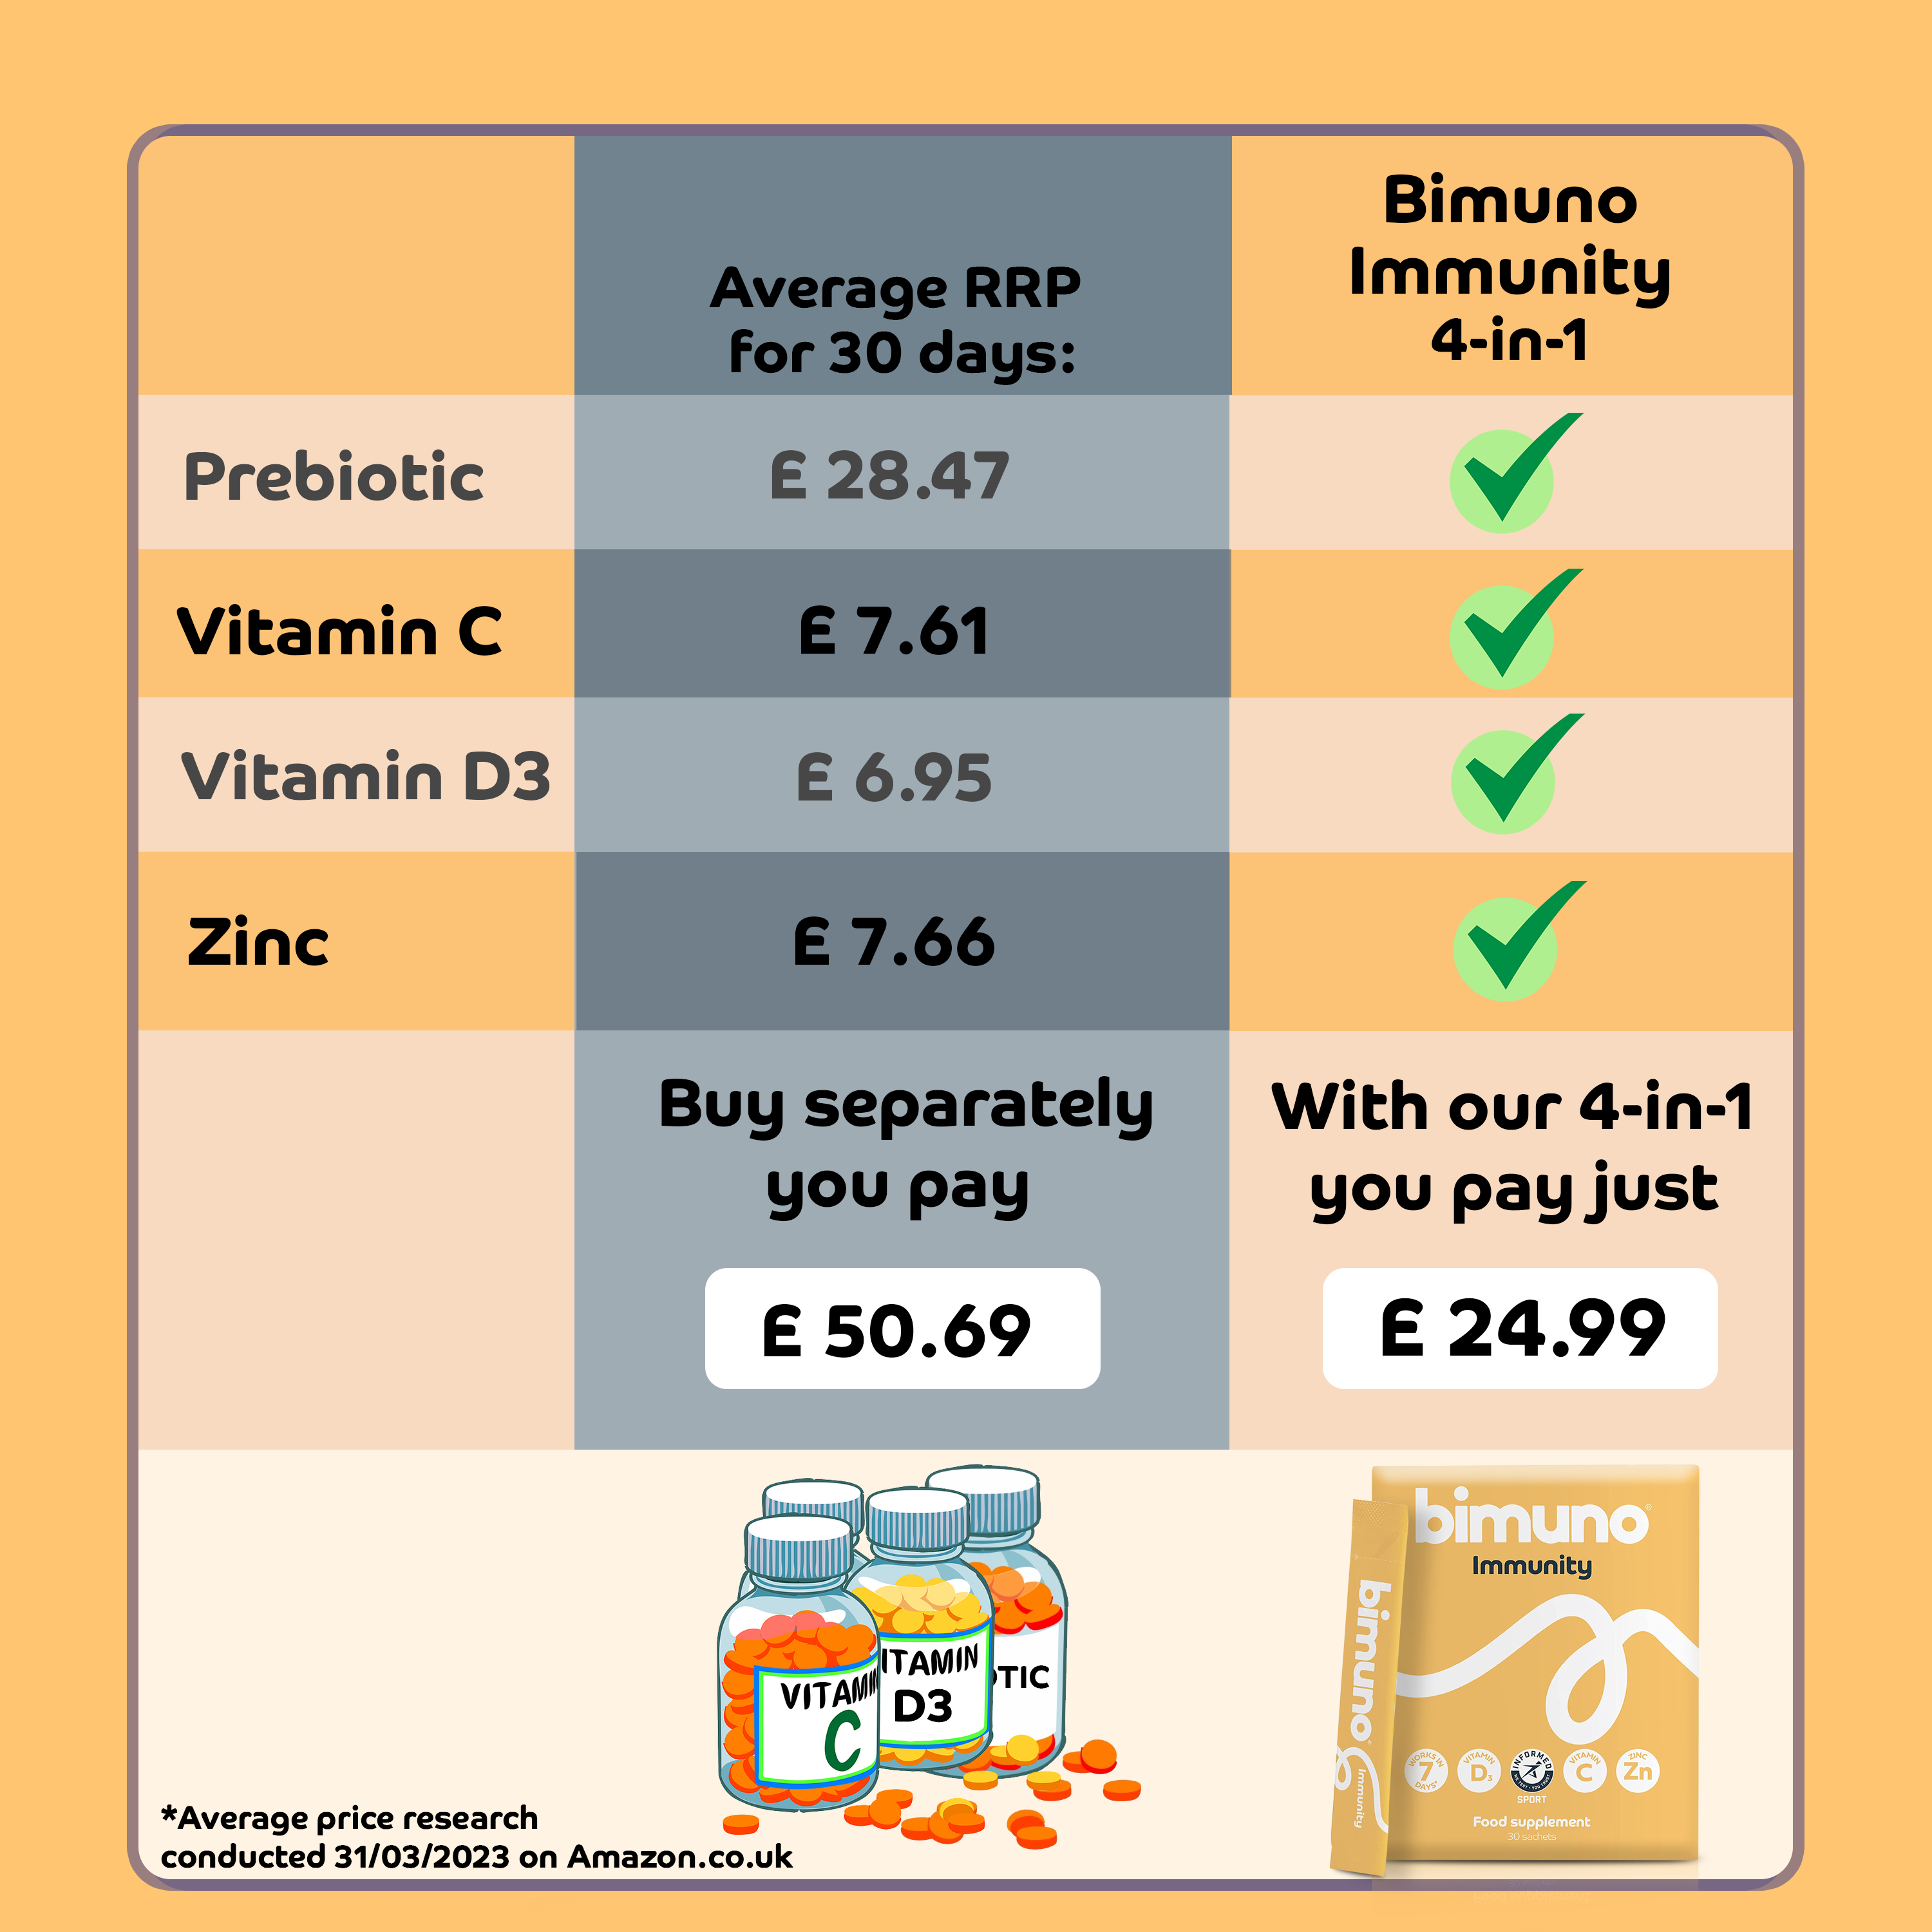 Prebiotic Vitamin C Vitamin D3 Zinc. Average RRP. for 30 days: E 28.47 £ 7.61. Average price research conducted 31/03/2023 on Amazon.co.uk. £ 6.95 Buy separately. you pay £ 50.69 £ 7.66 VITAMIN C. D3 Bimuno Immunity 4-in-1 With our 4-in-1 you pay just E 24.99 bimuno Immunity bimuno Immunity SIN DAYS MED WE TEST, YOU TRUST SPORT VITAMIN. Food supplement, 30 sachets. ZINC.